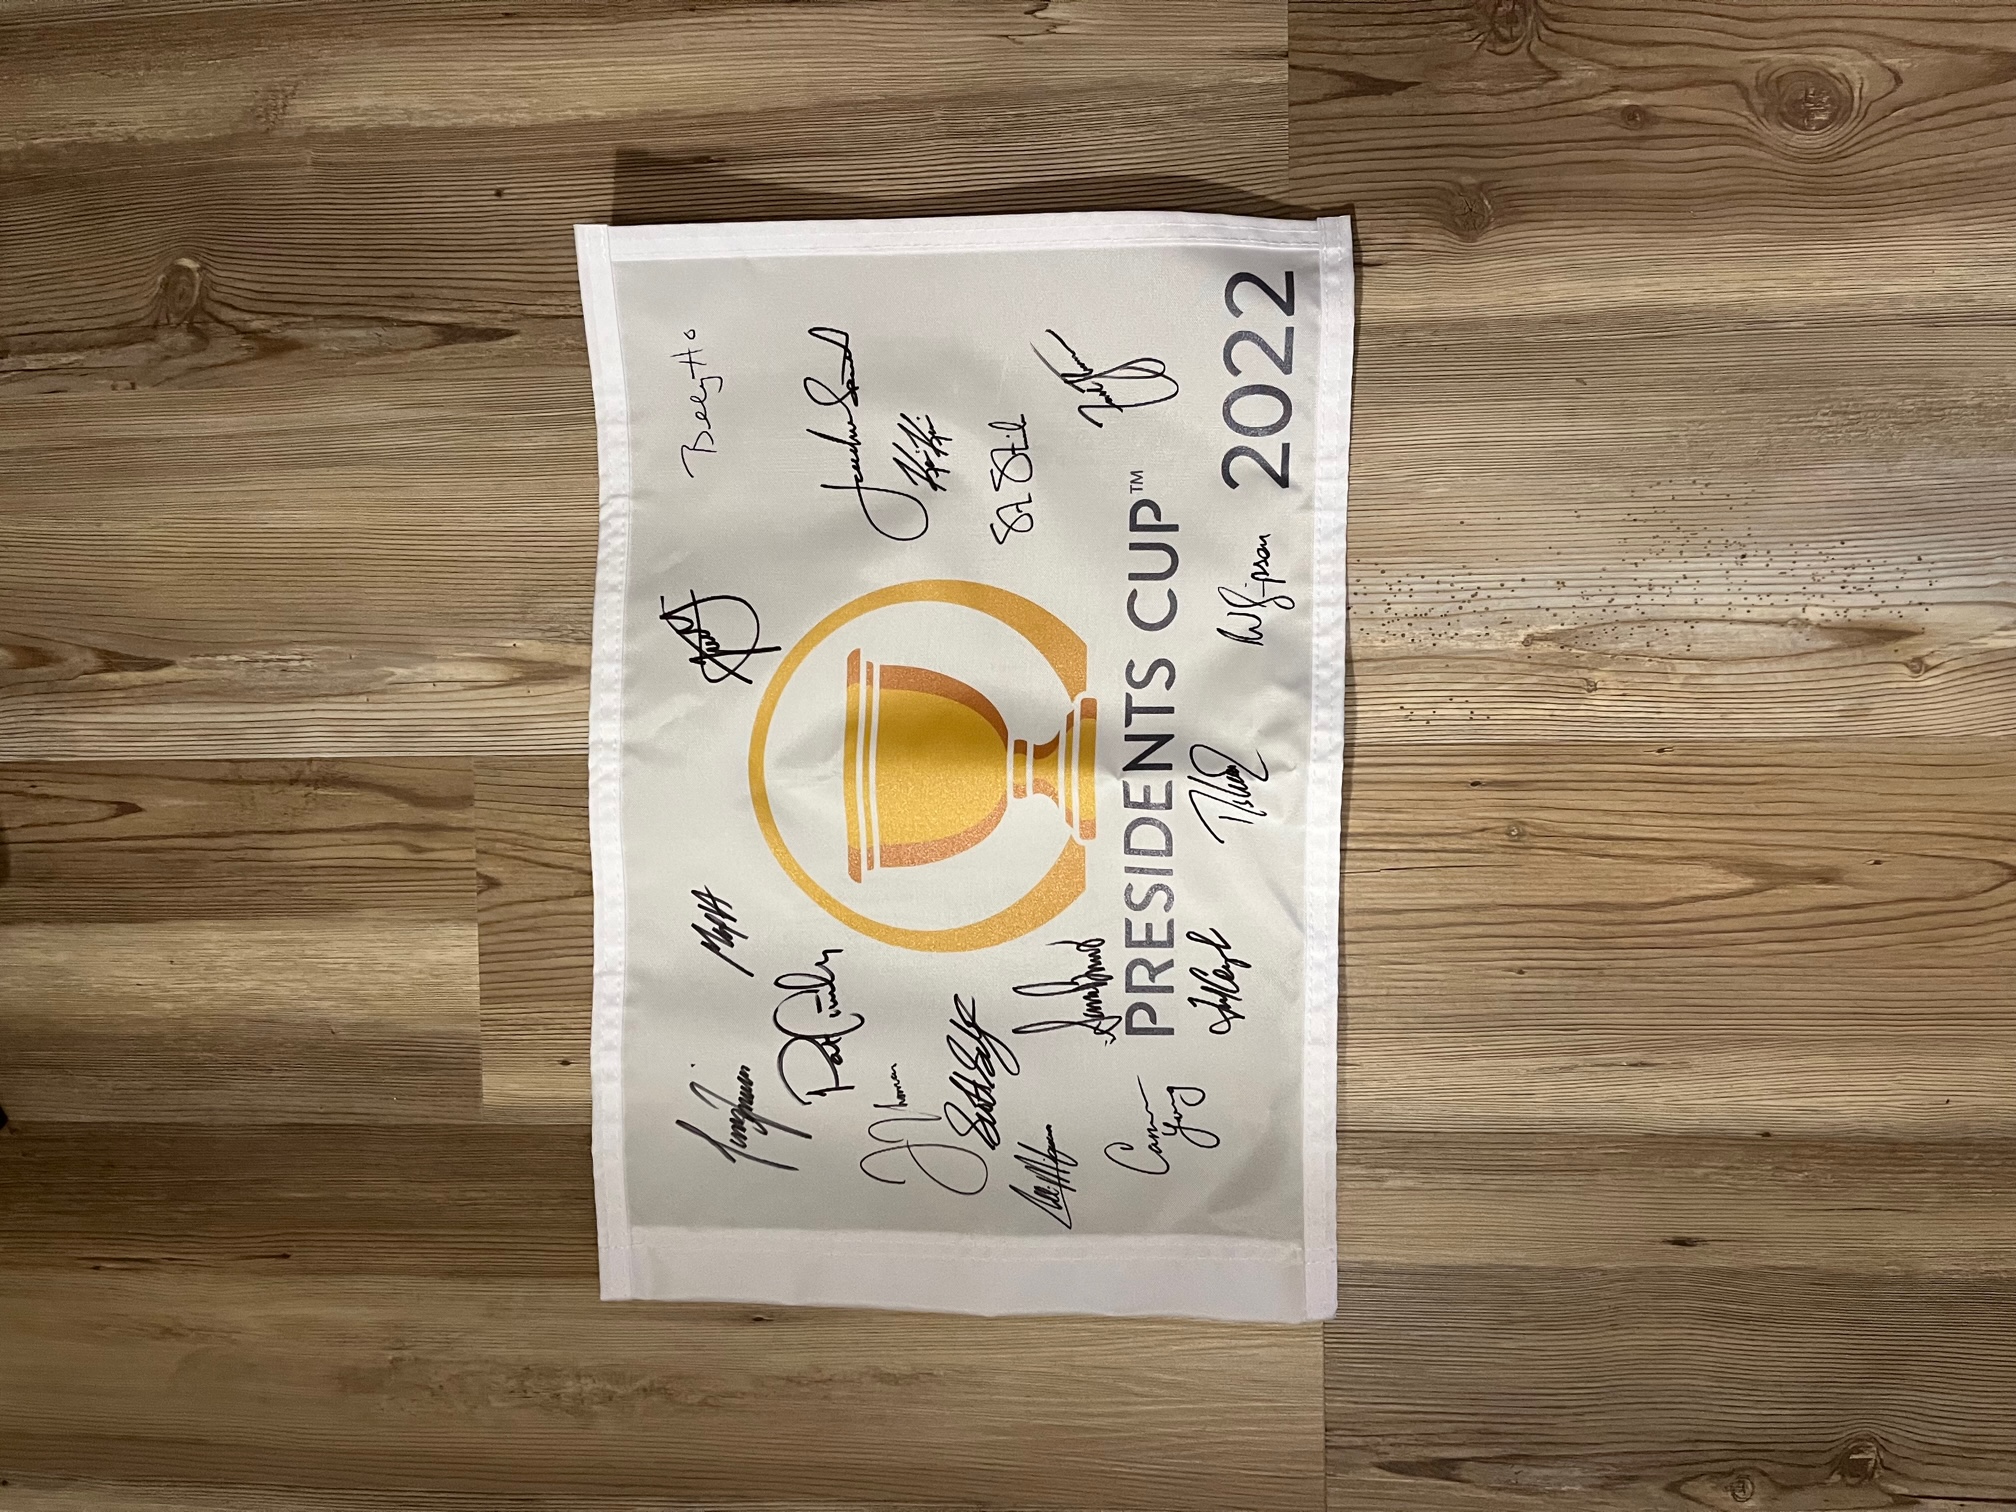 Autographed Presidents Cup Flag (1 of 50 signed)